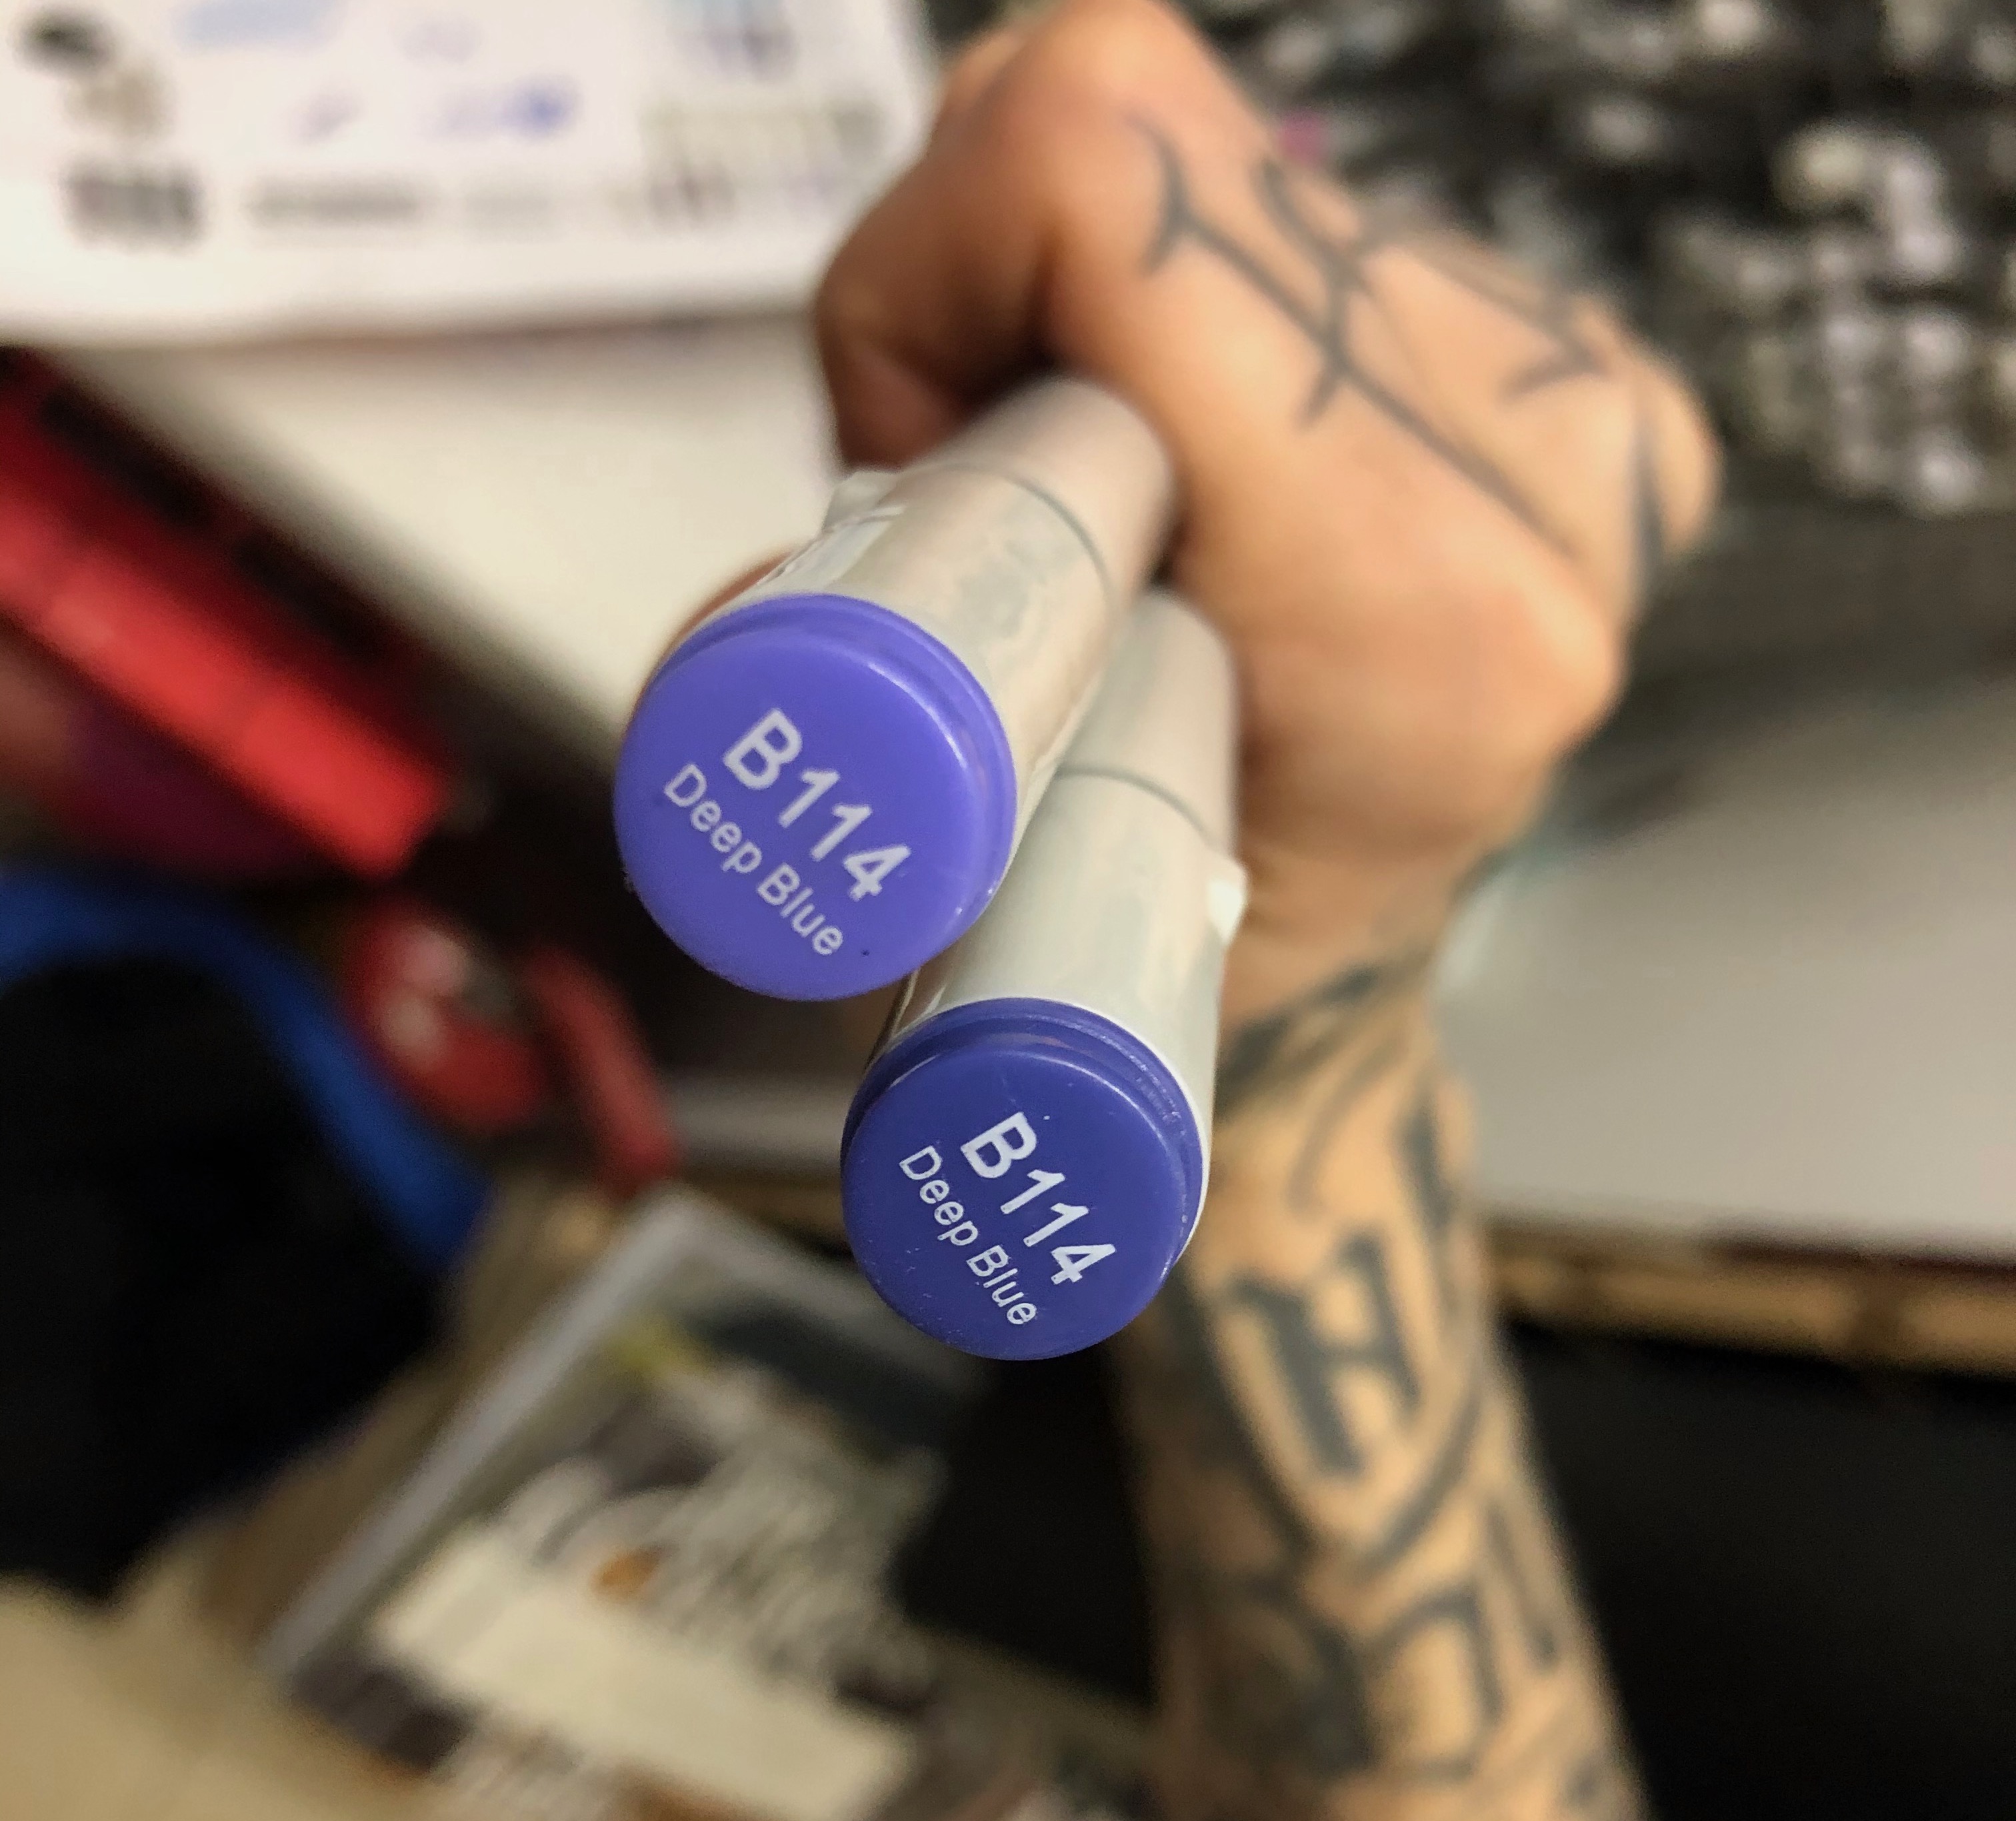 FINECOLOUR brand markers caps from different batches